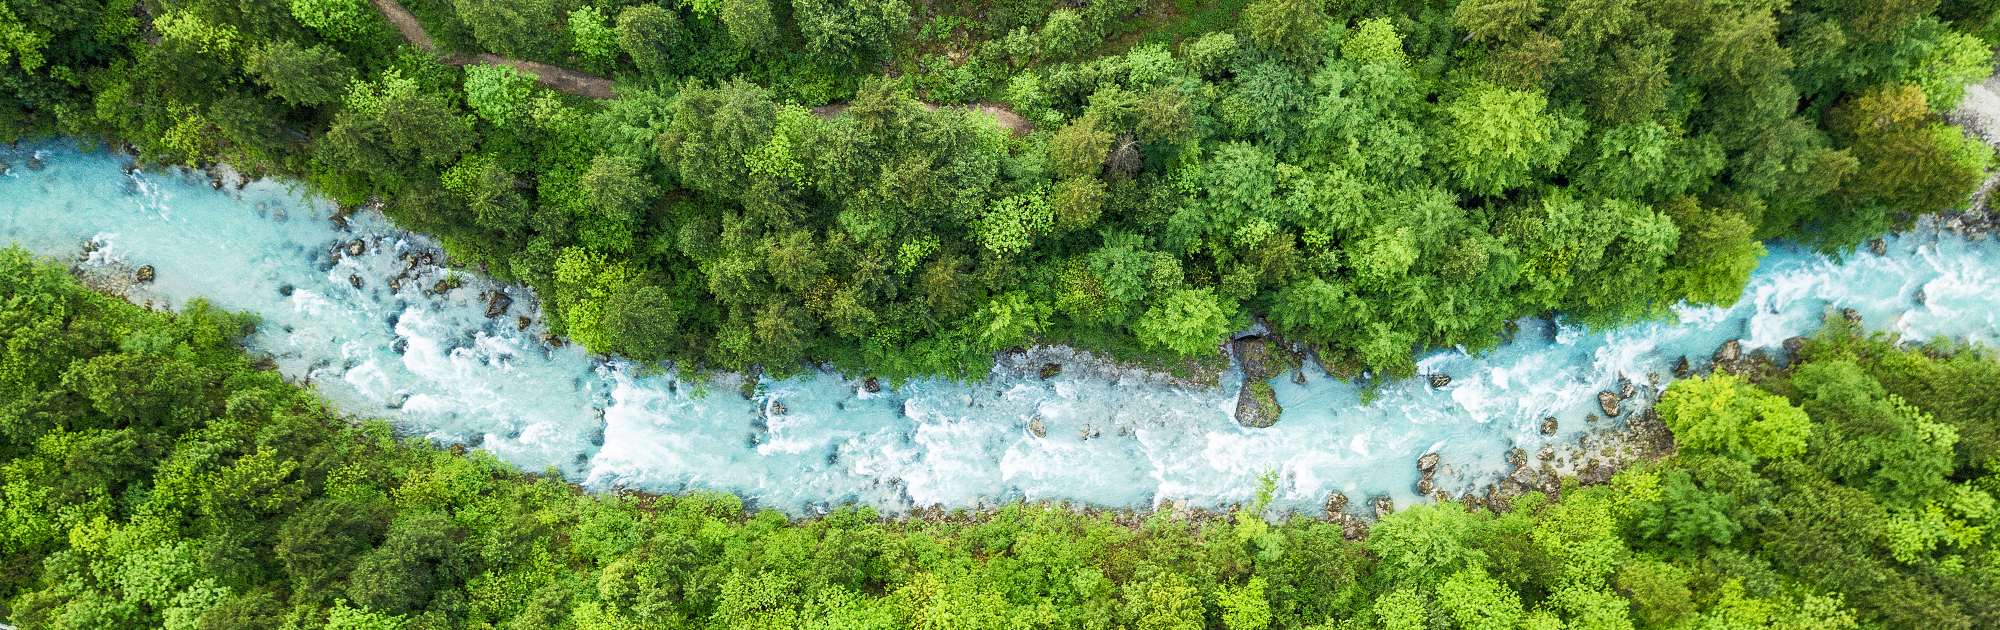 birds eye view of river in a forest